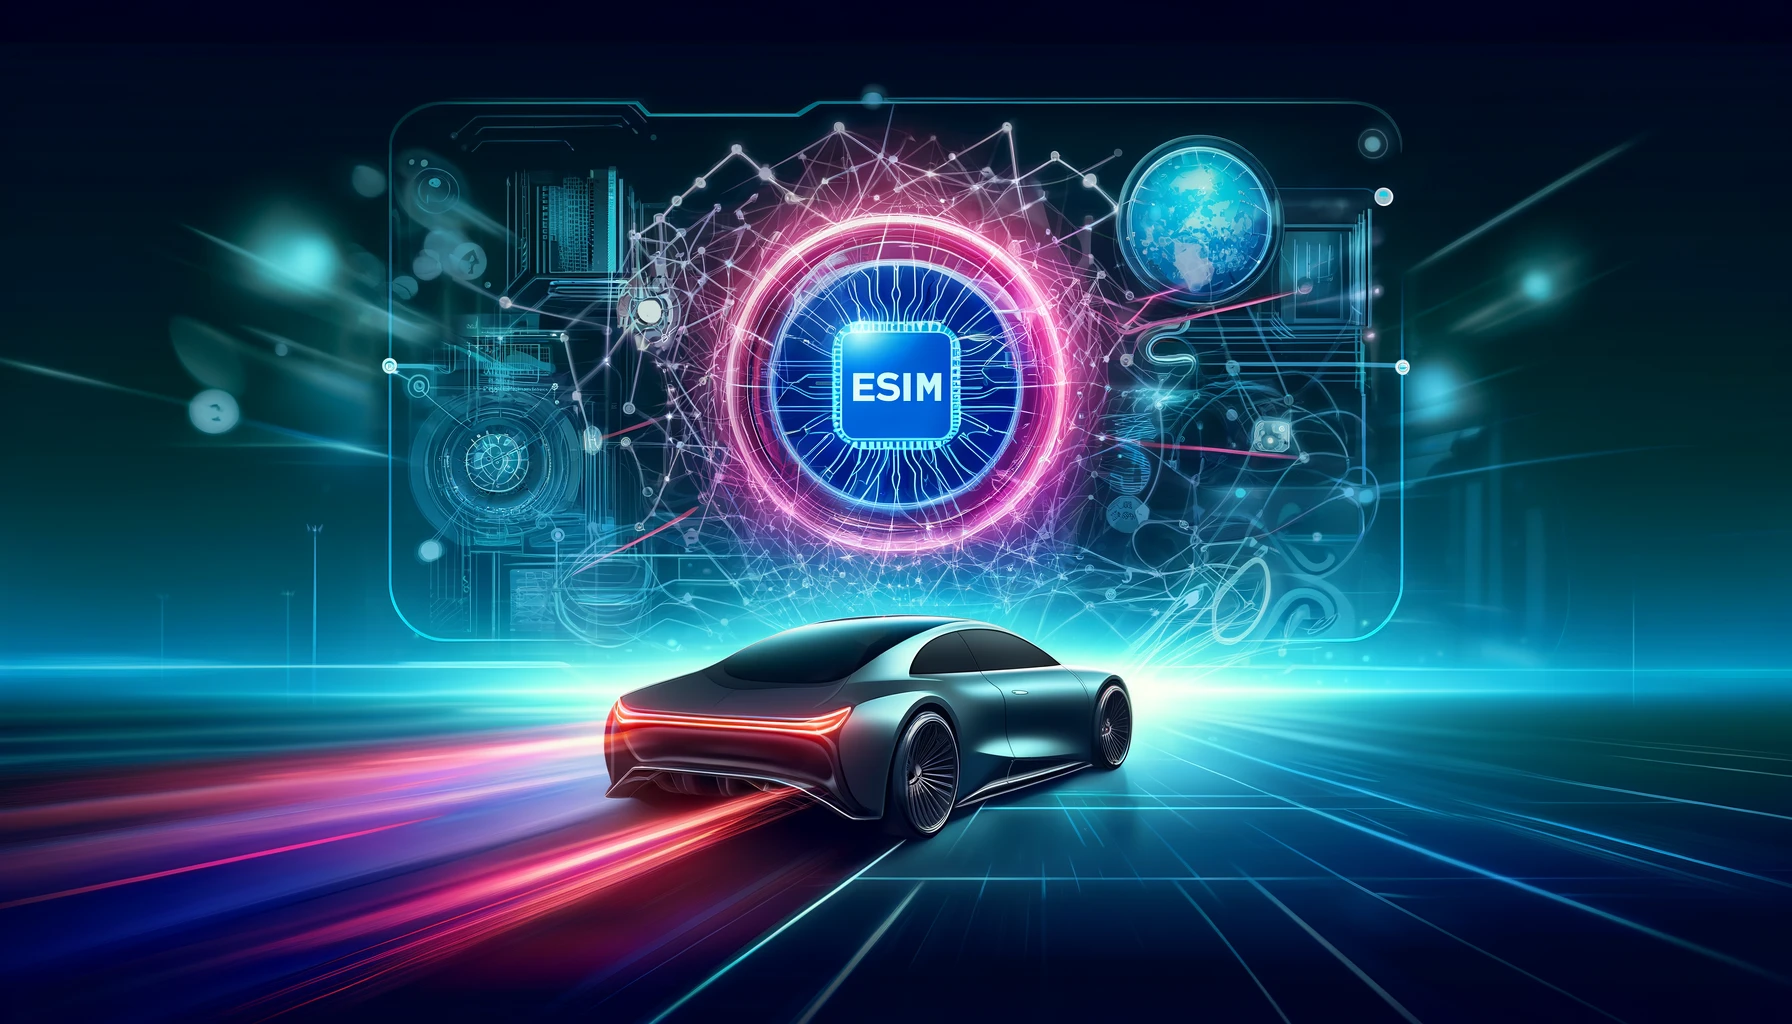 Revolutionizing Automotive Connectivity with eSIM Technology - imei.info पर समाचार इमेजेज